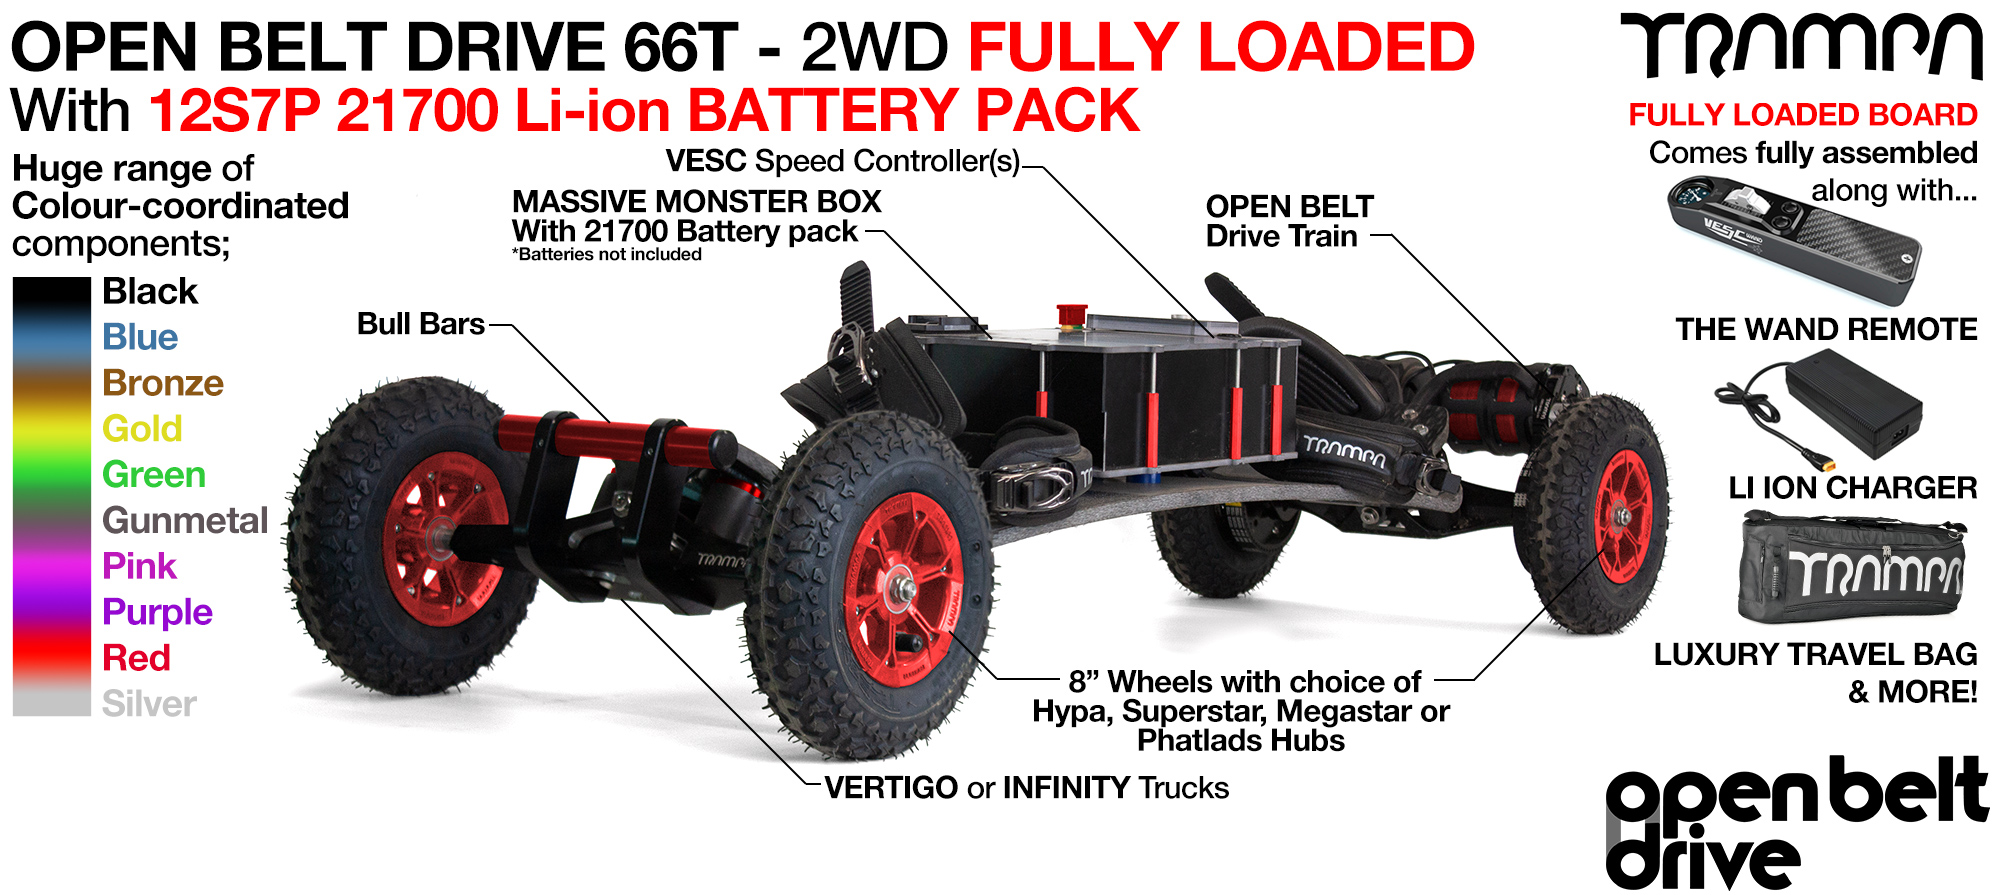 2WD 66T Open Belt Drive TRAMPA Electric Mountainboard with 8 Inch Wheels & 66 Tooth Pulleys - FULLY LOADED 21700 CELL Pack